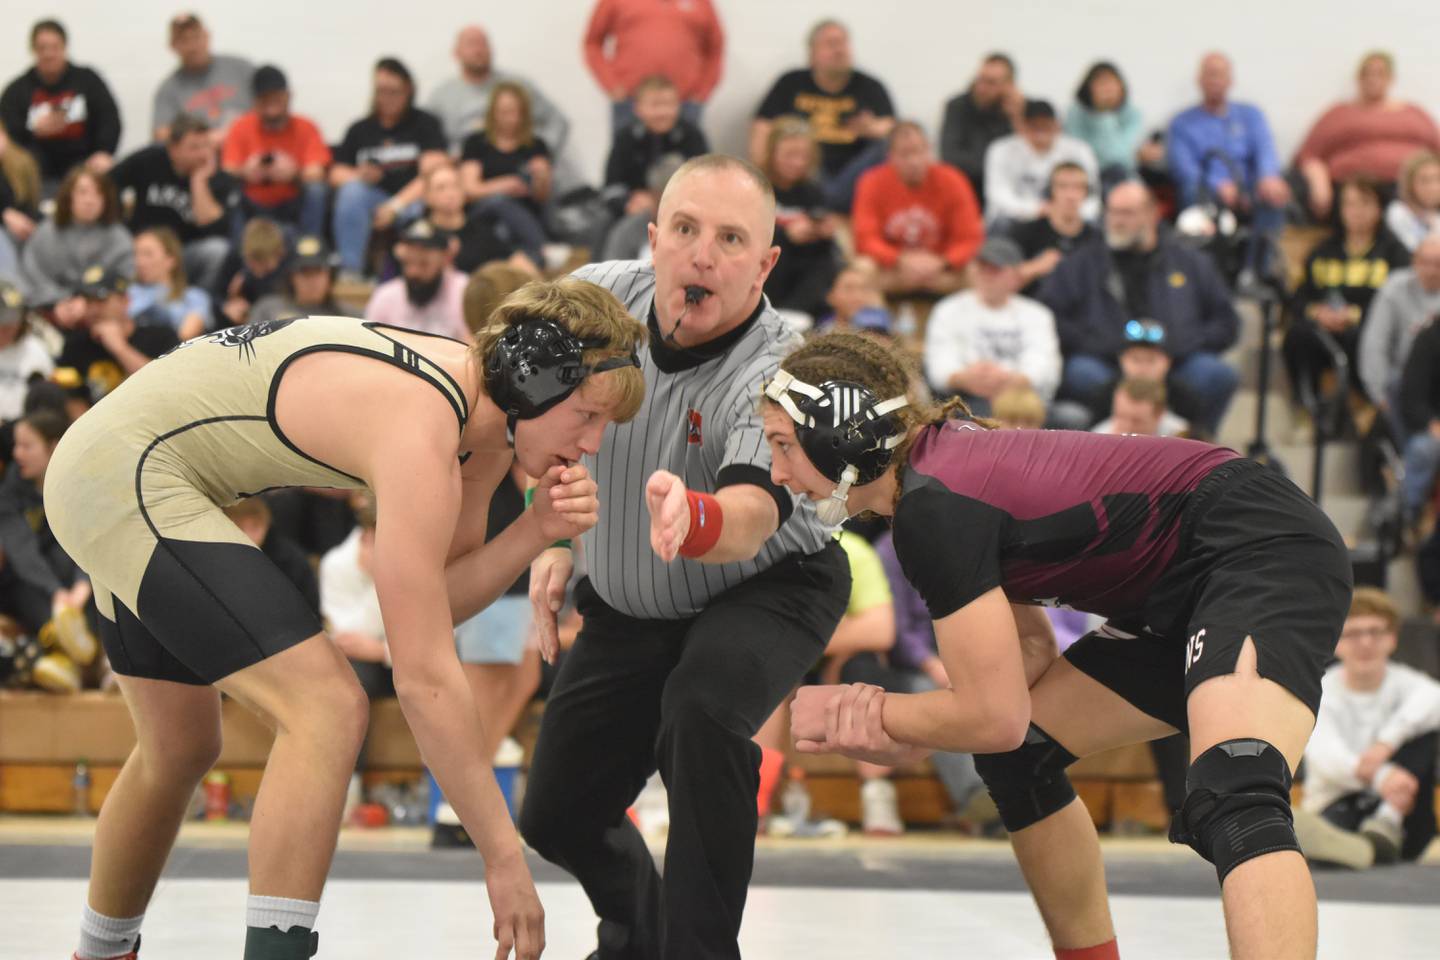 Uriah Fry faces off against Creston’s Austin Evans in the 144 lbs finals Saturday in Corning at the 69th annual John J. Harris tournament. Evans pinned Fry with only five seconds remaining in the first period to win the title